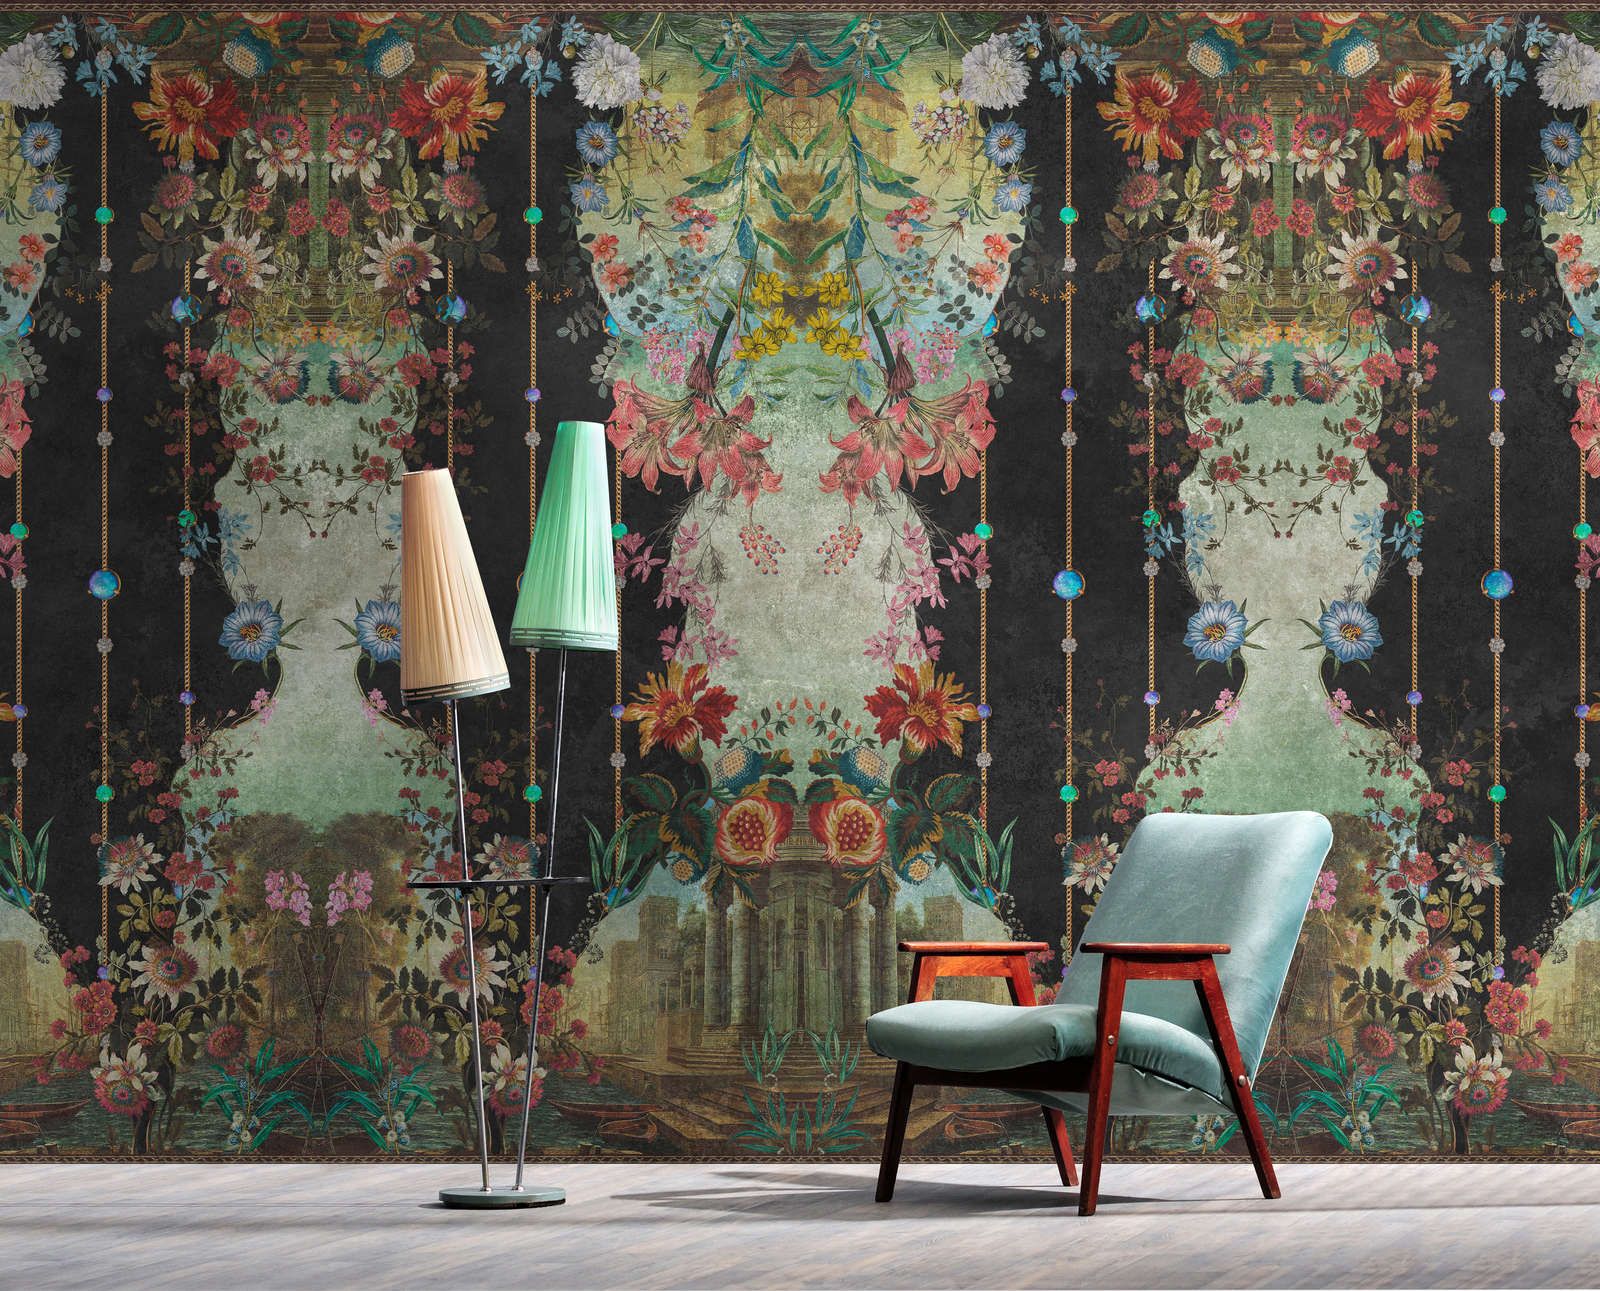             Photo wallpaper »ophelia« - Ornamental panelling with floral design on vintage plaster texture - Matt, smooth non-woven fabric
        